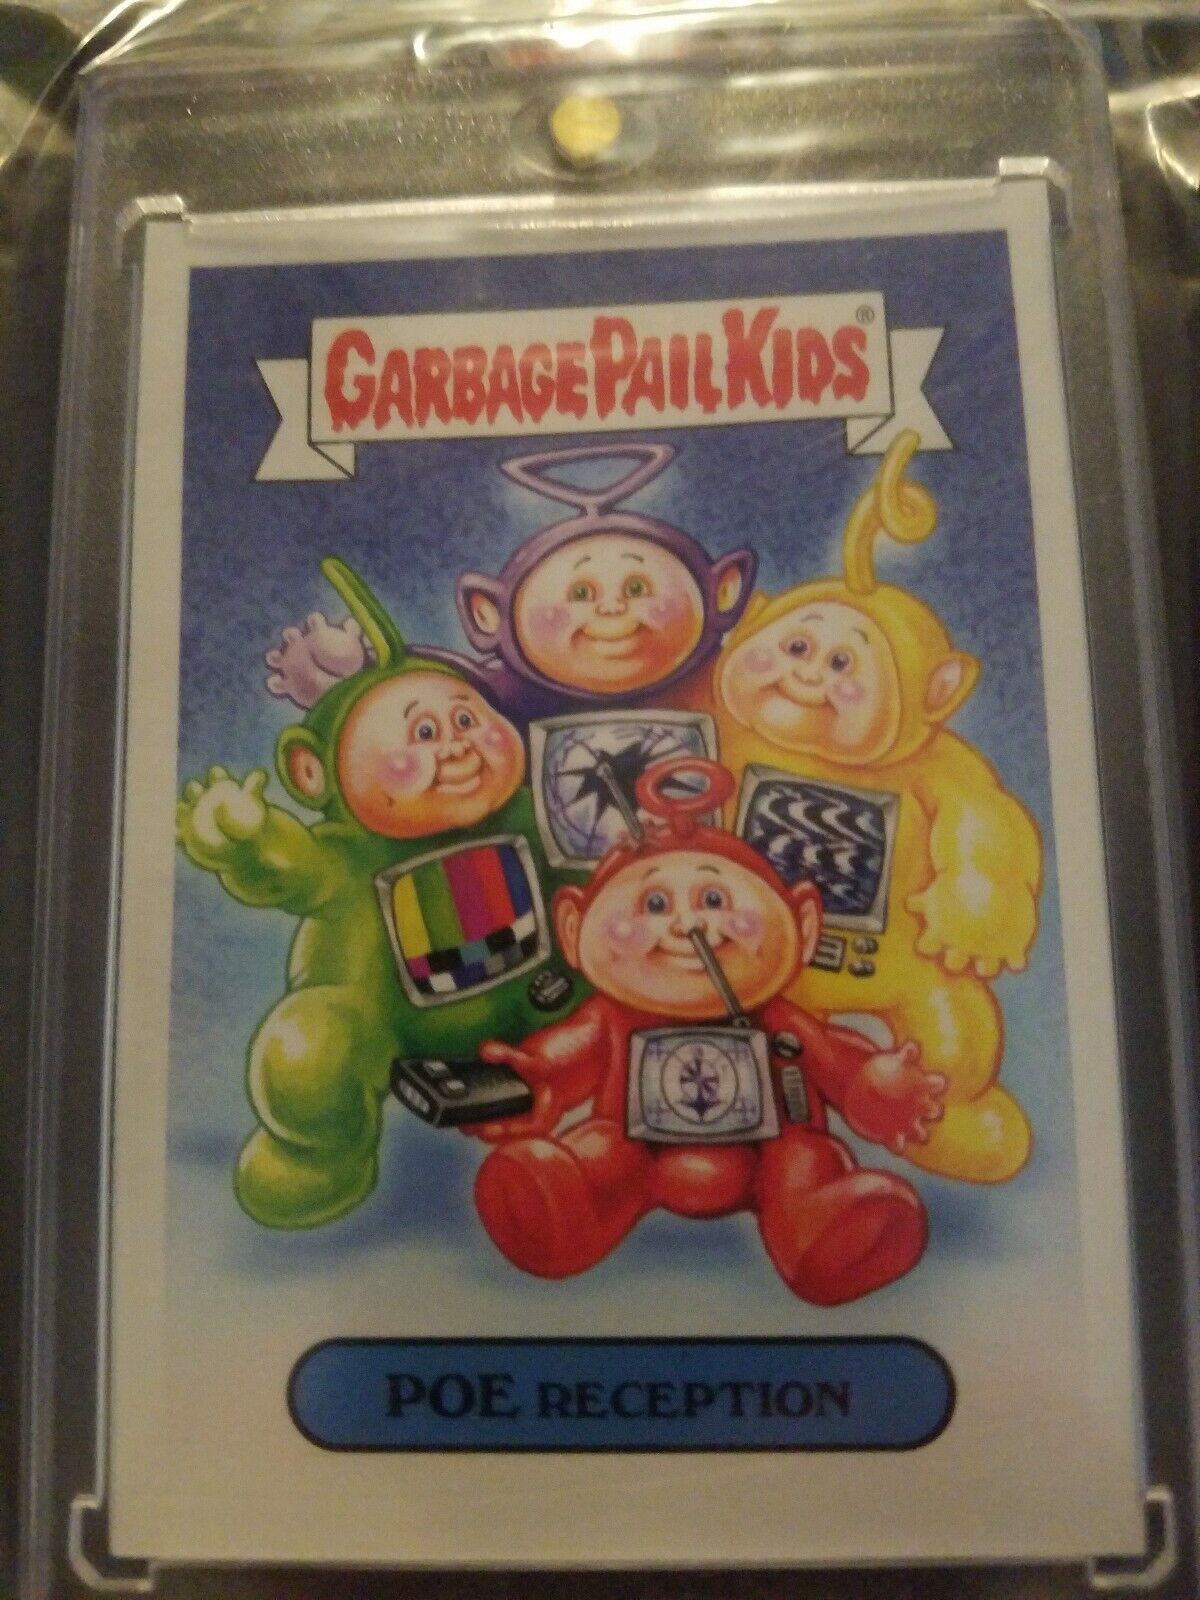 2019 GPk We Hate The 90's 1/1 Blank Back.Poe Reception Teletubbies spoof os1 PSA